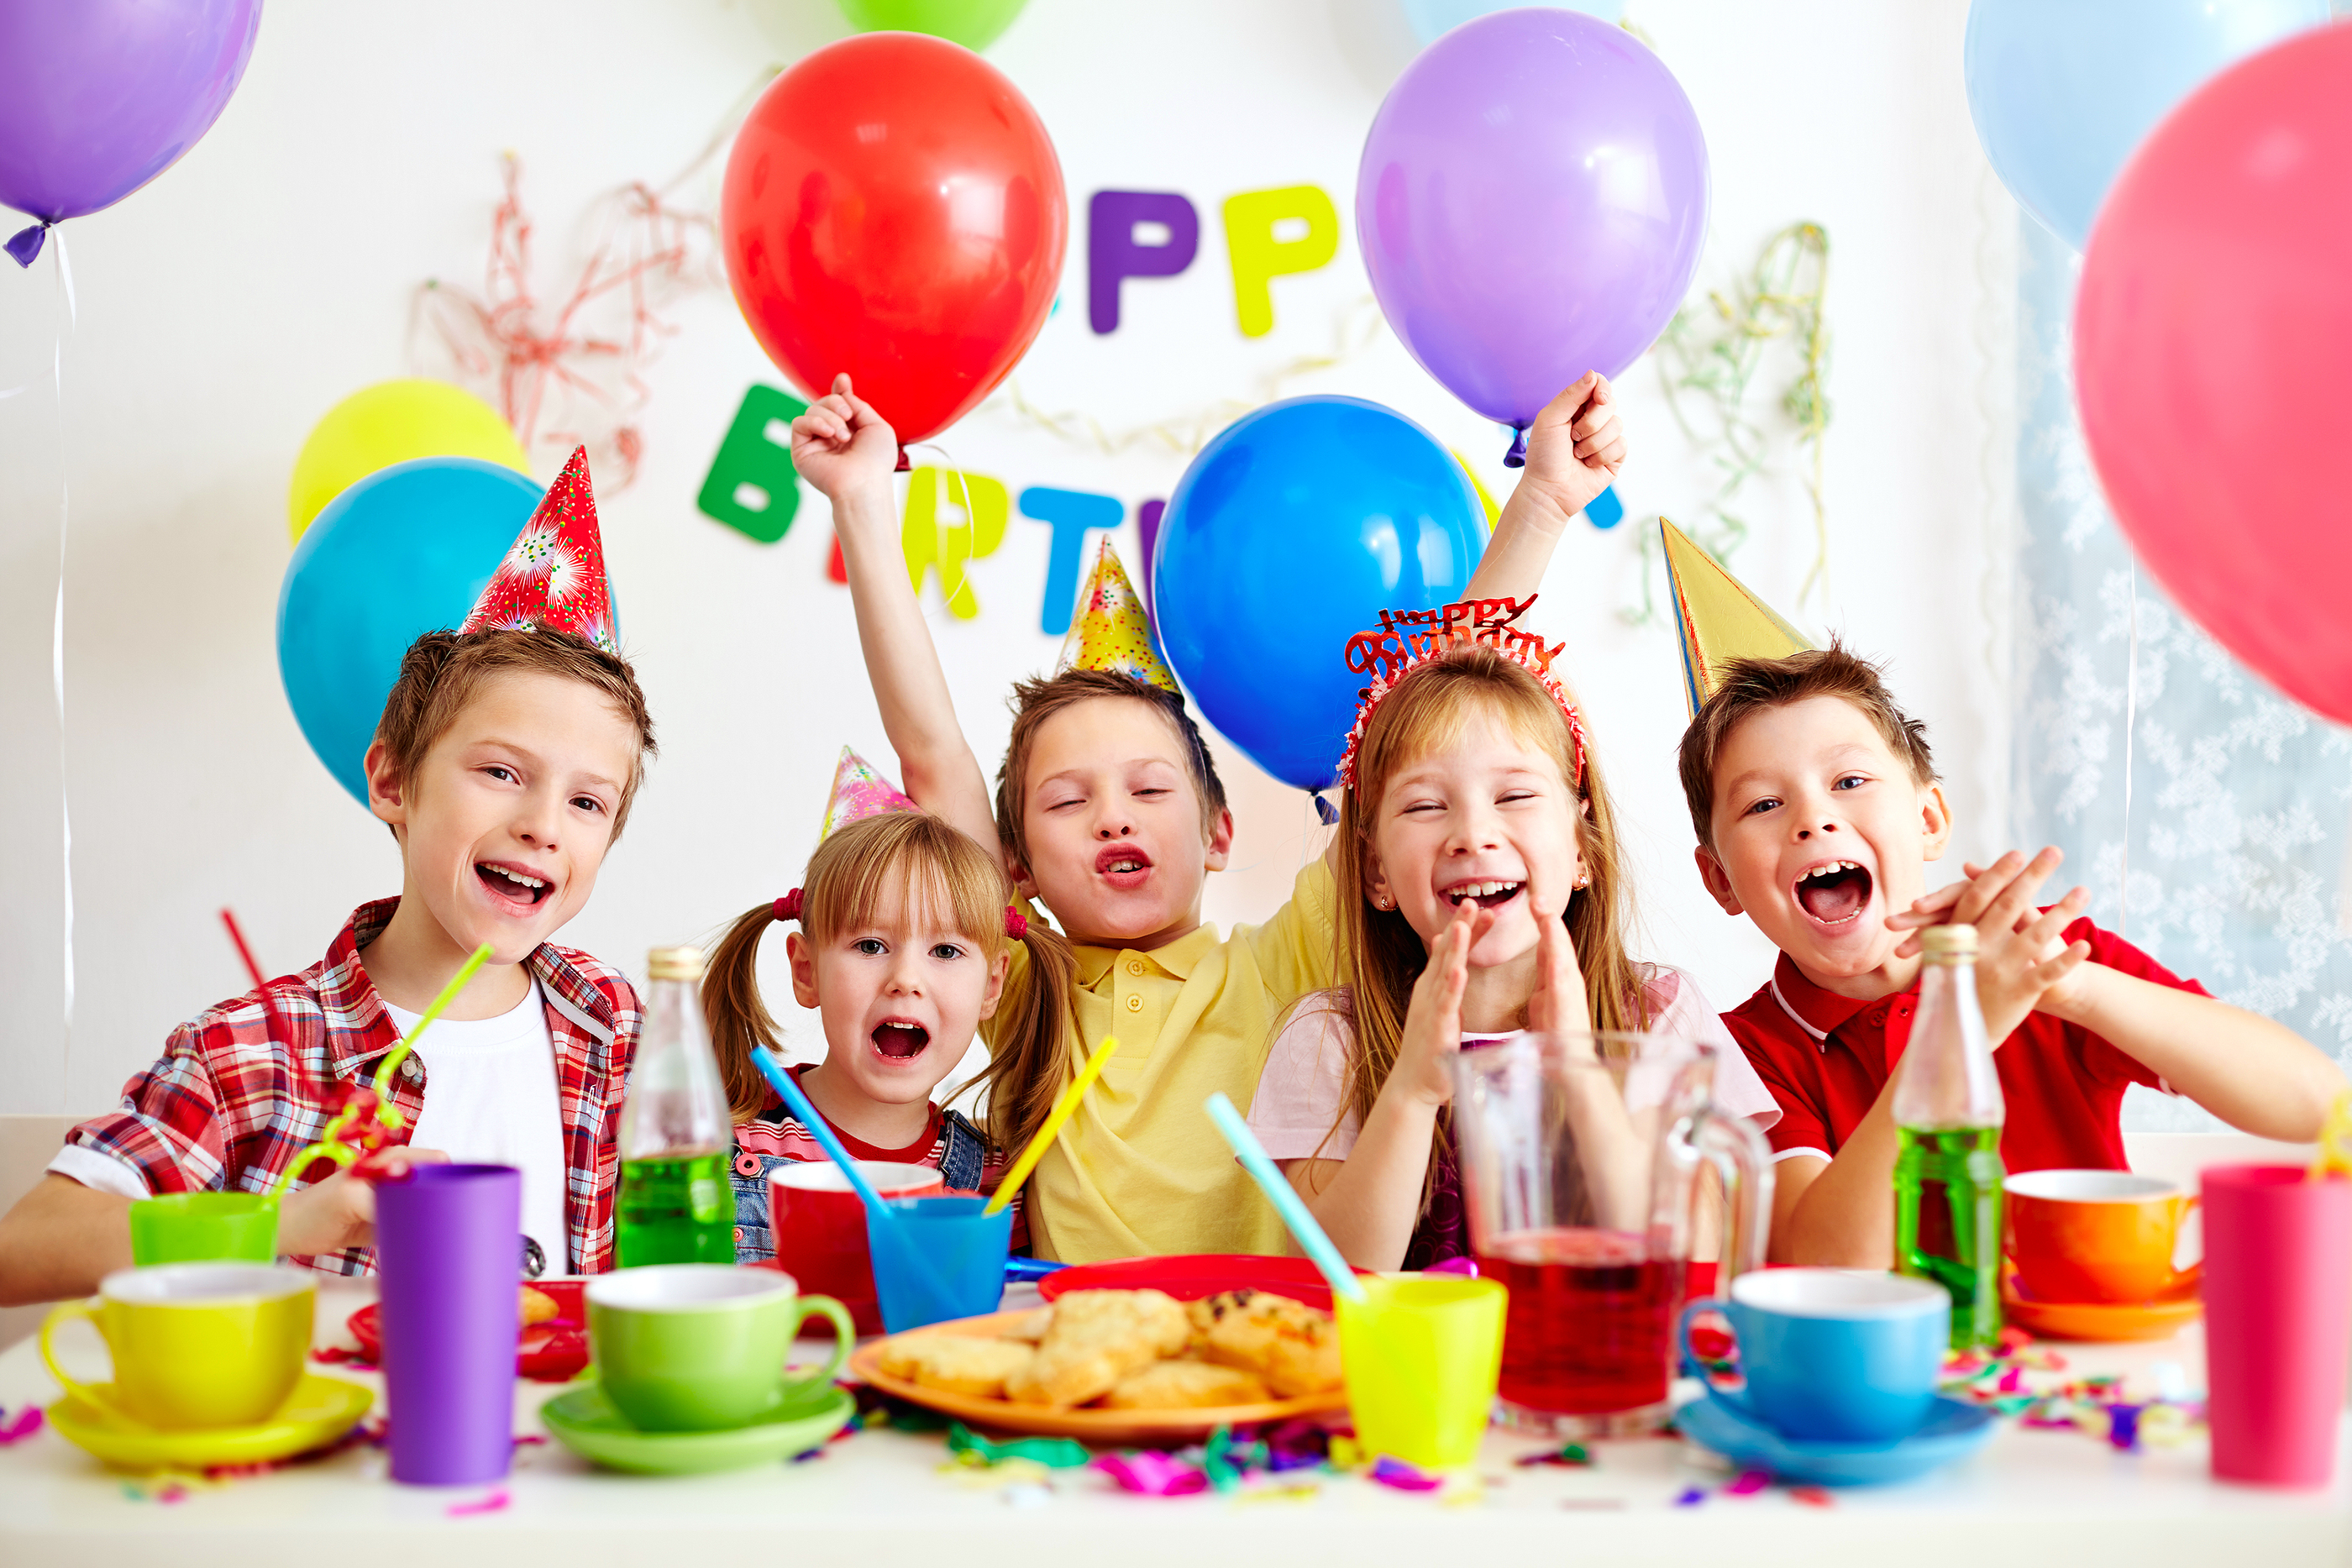 Free download birthday party HD background wallpaper [2800x1867] for your Desktop, Mobile & Tablet. Explore Birthday Party Wallpaper. Free Birthday Wallpaper, Birthday Wallpaper Image, Party Wallpaper